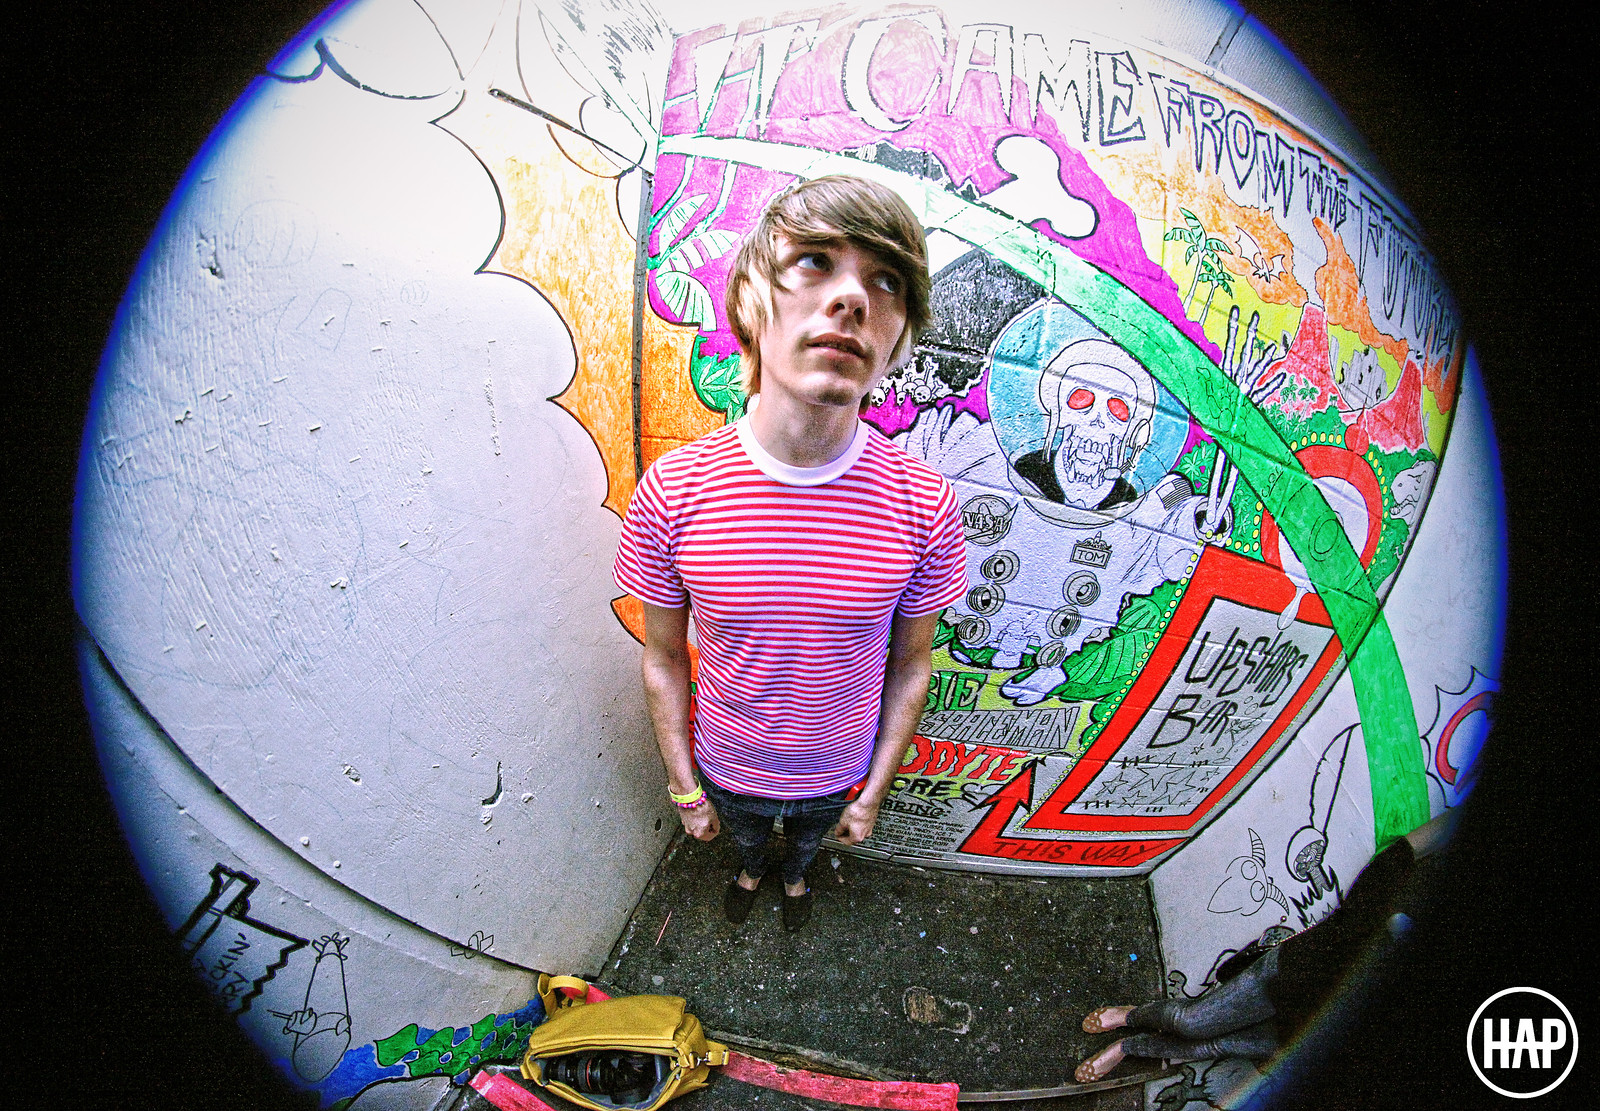 3-9-13 Awsten at Number's in Houston, Texas by Heather Ann Phillips on Flickr